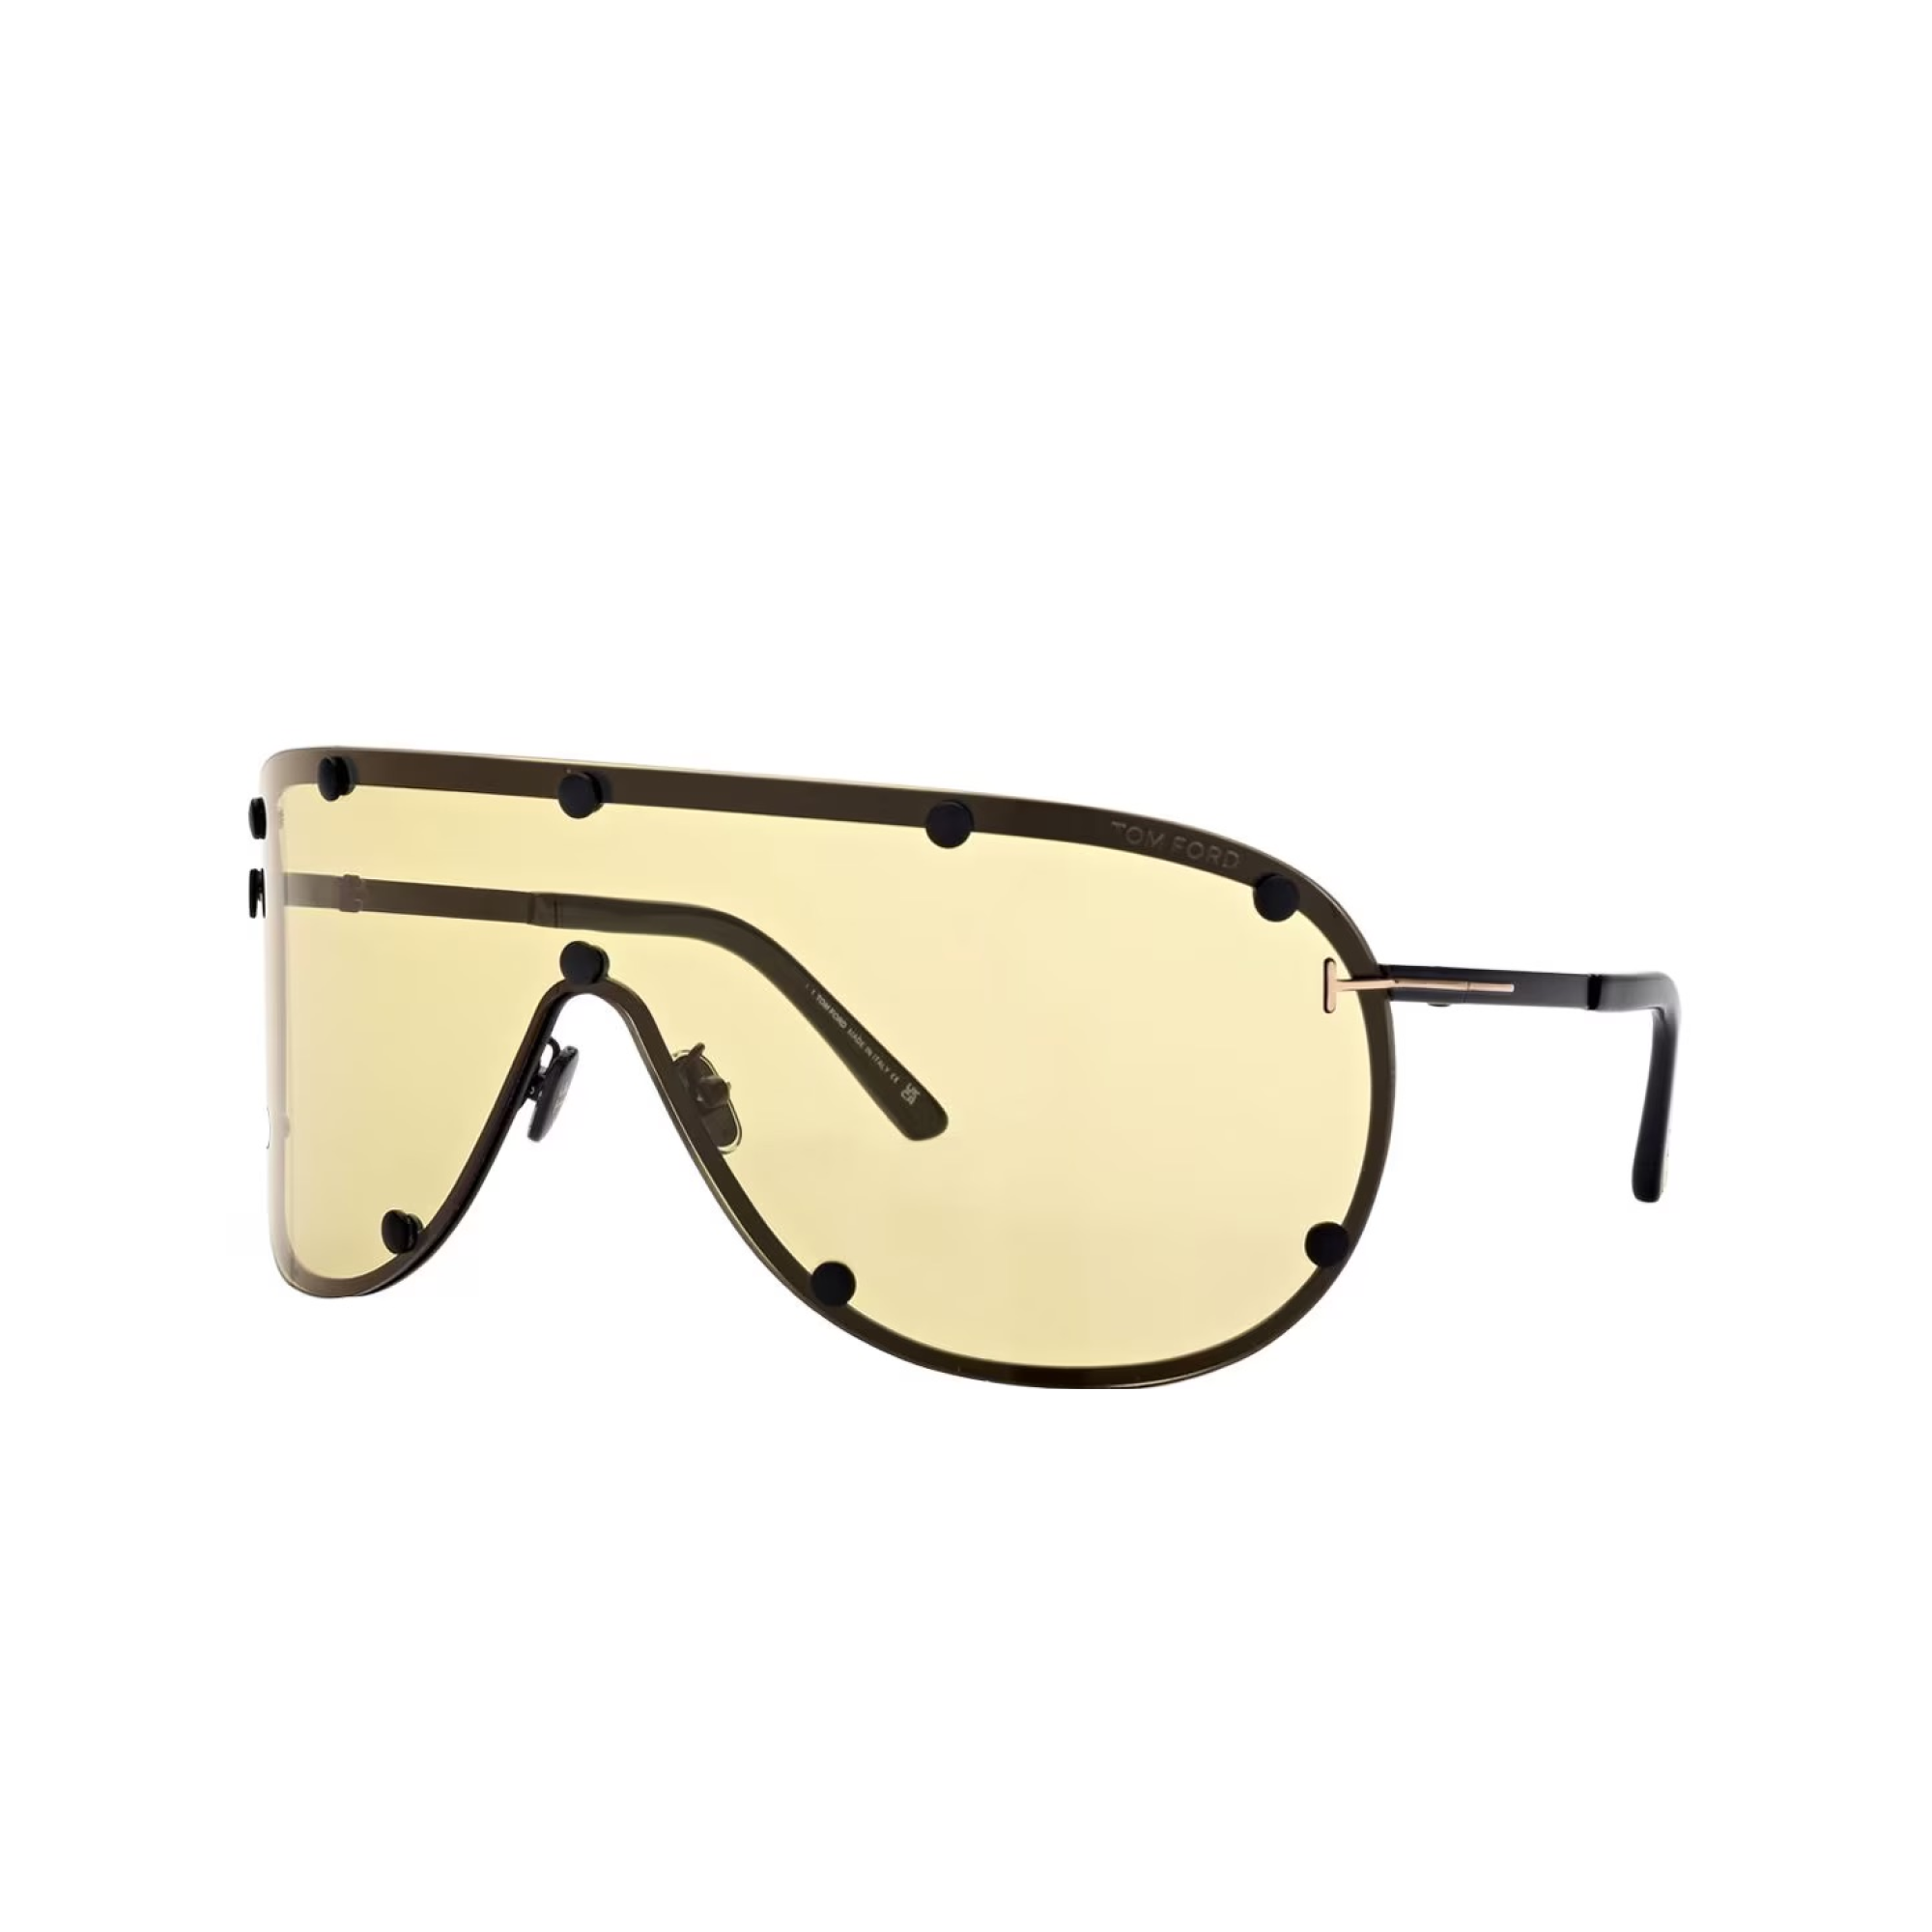 Details more than 67 tom ford shield sunglasses best